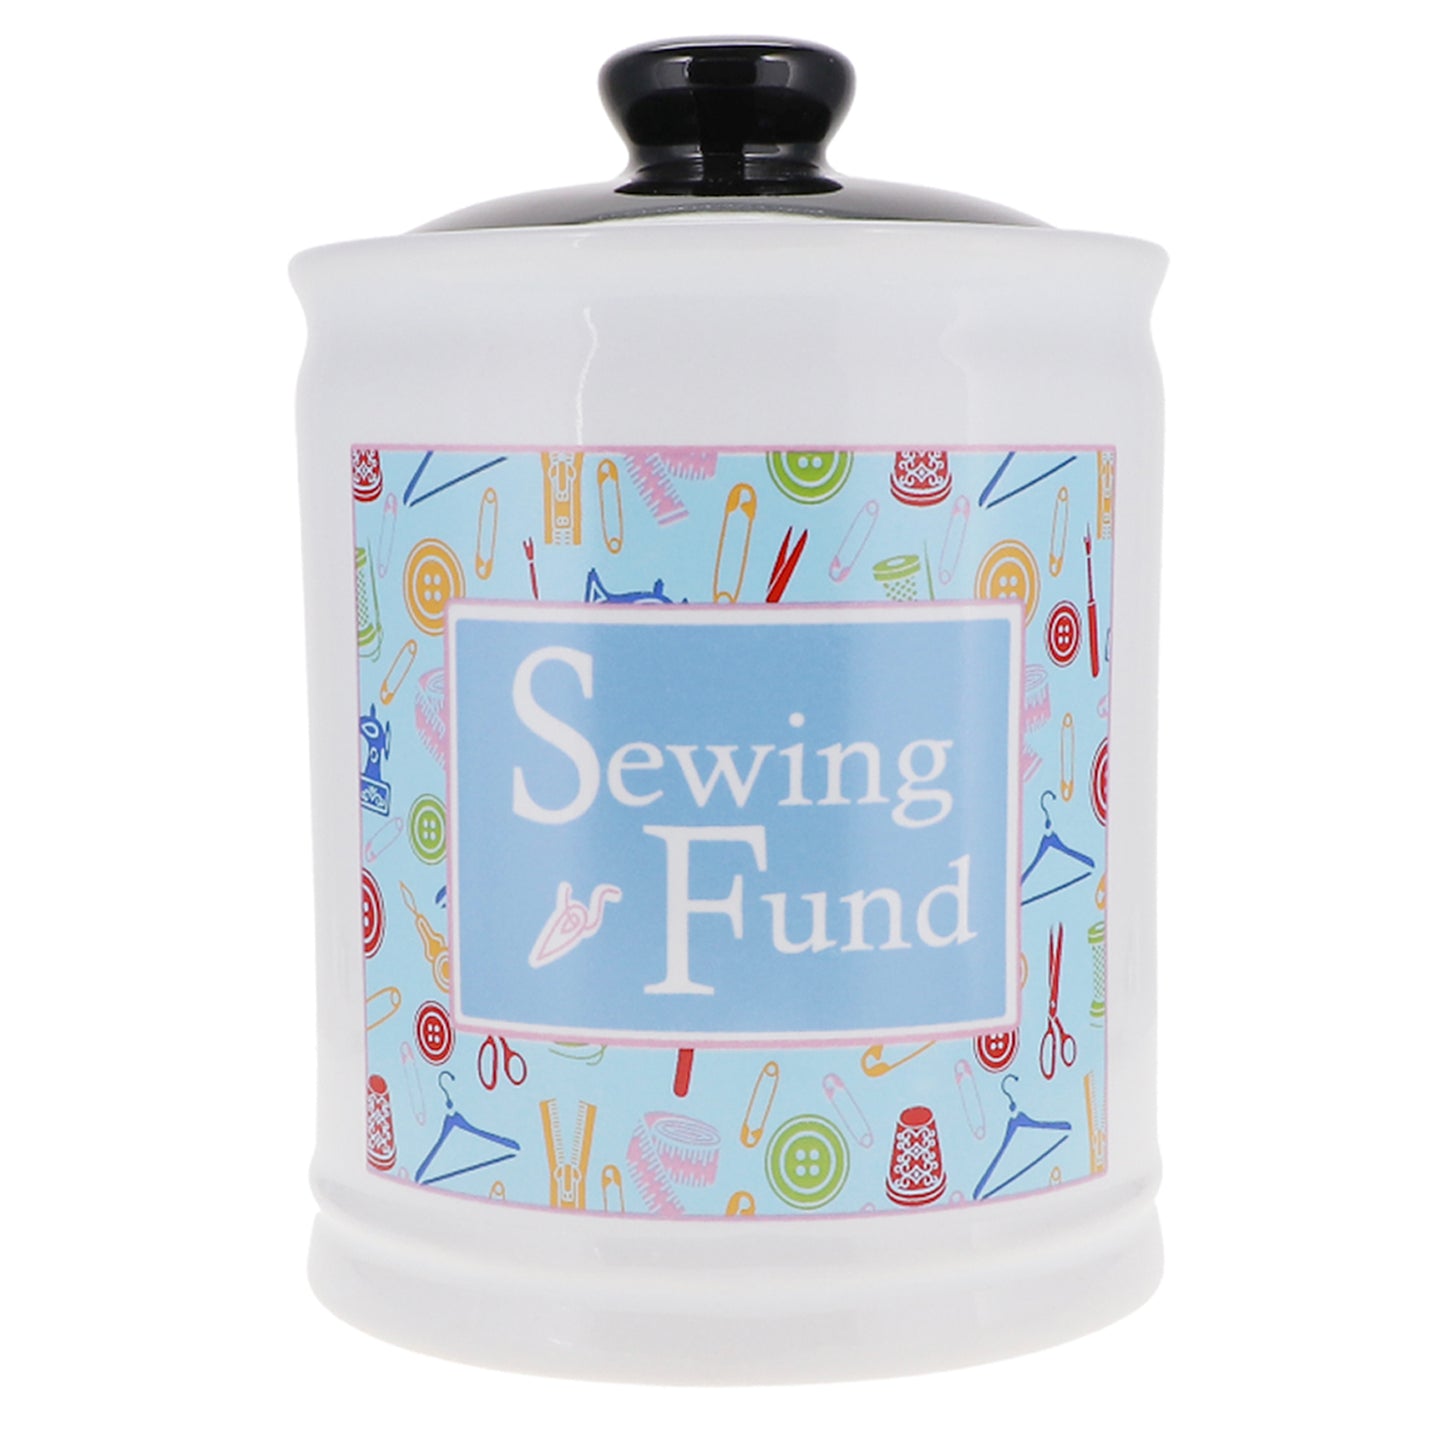 Cottage Creek Sewing Fund Piggy Bank, Ceramic, 6", Multicolored Sewing Supplies Jar